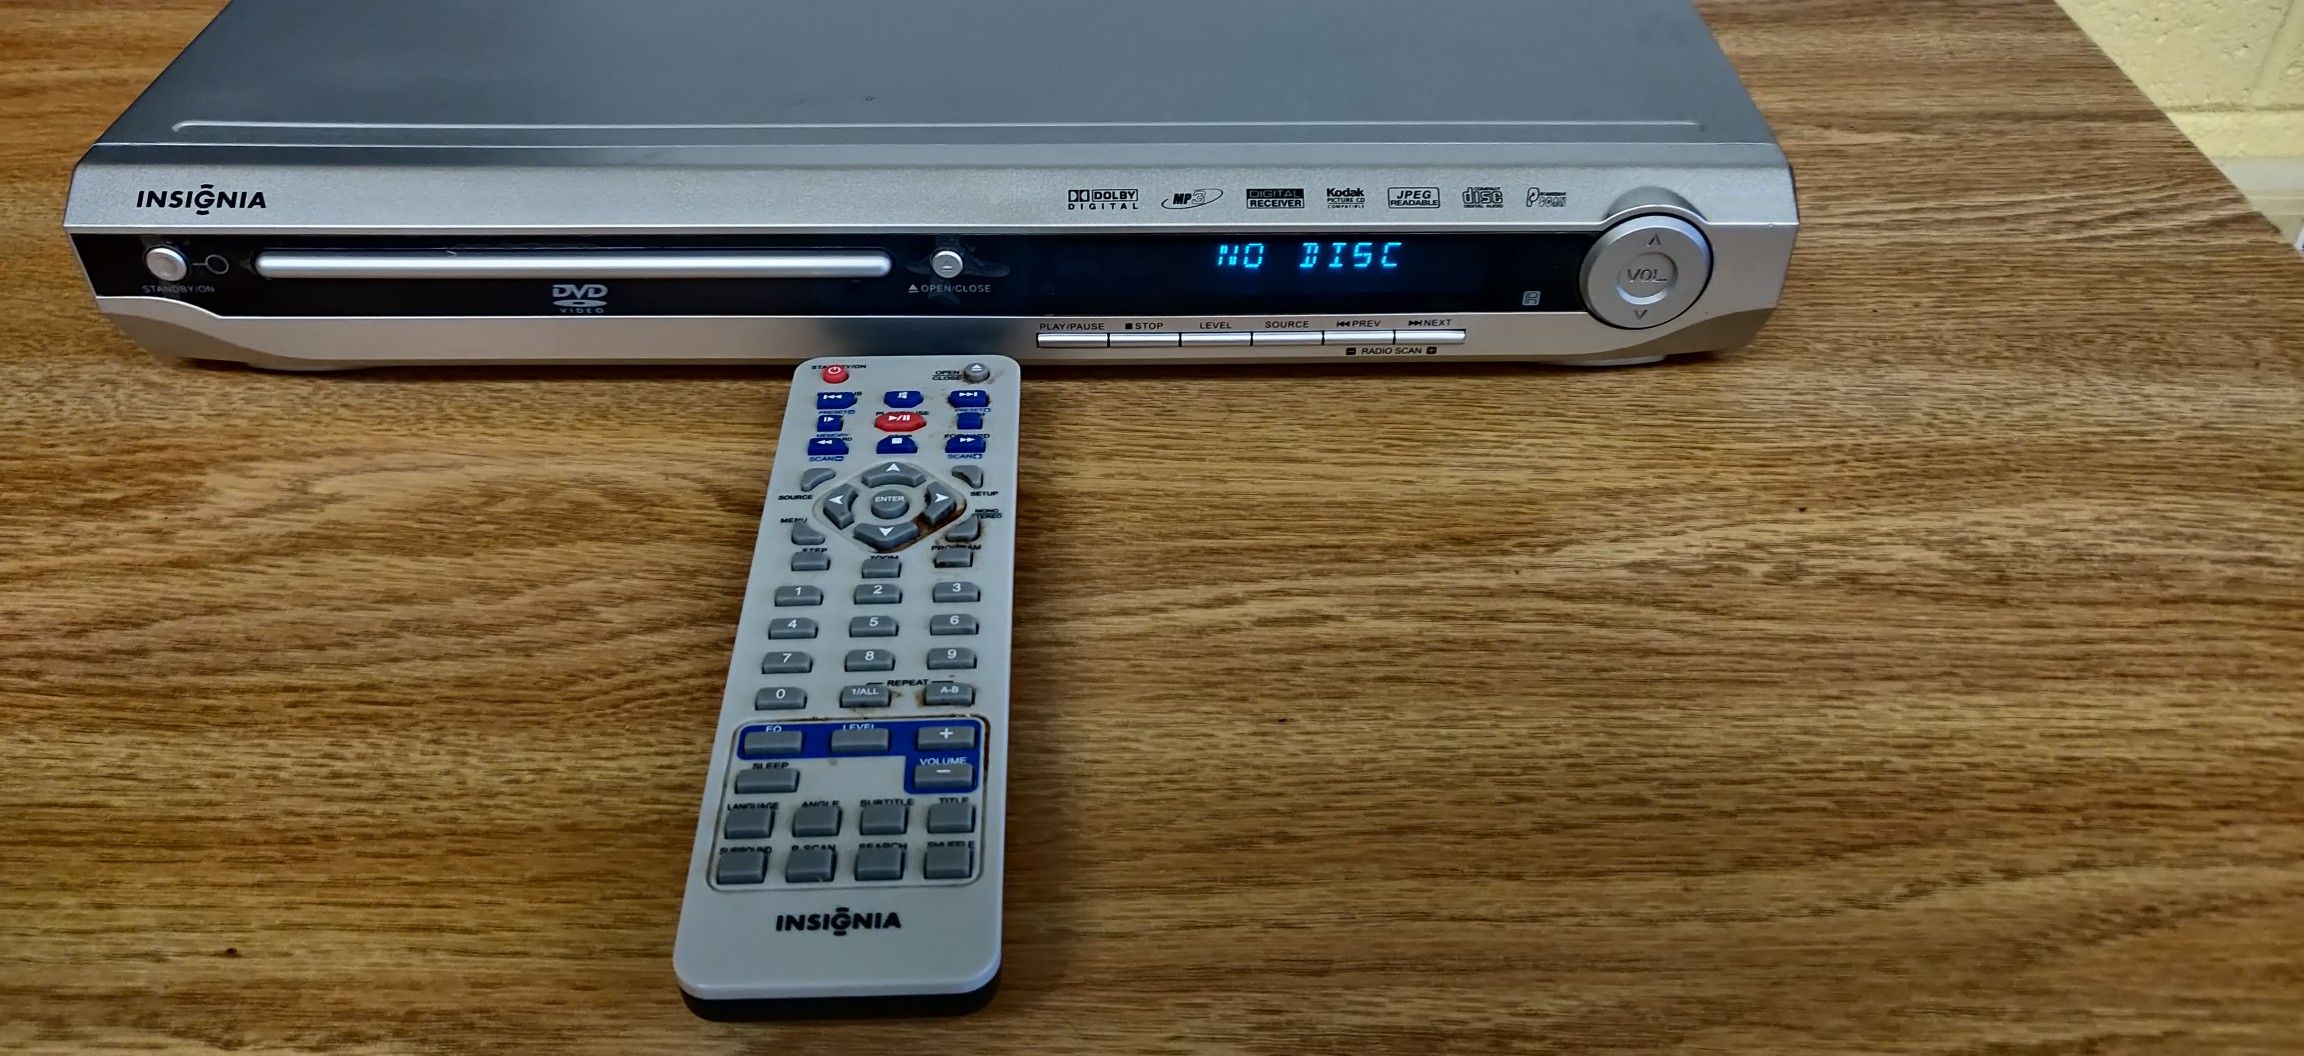 Insignia dvd player with remote